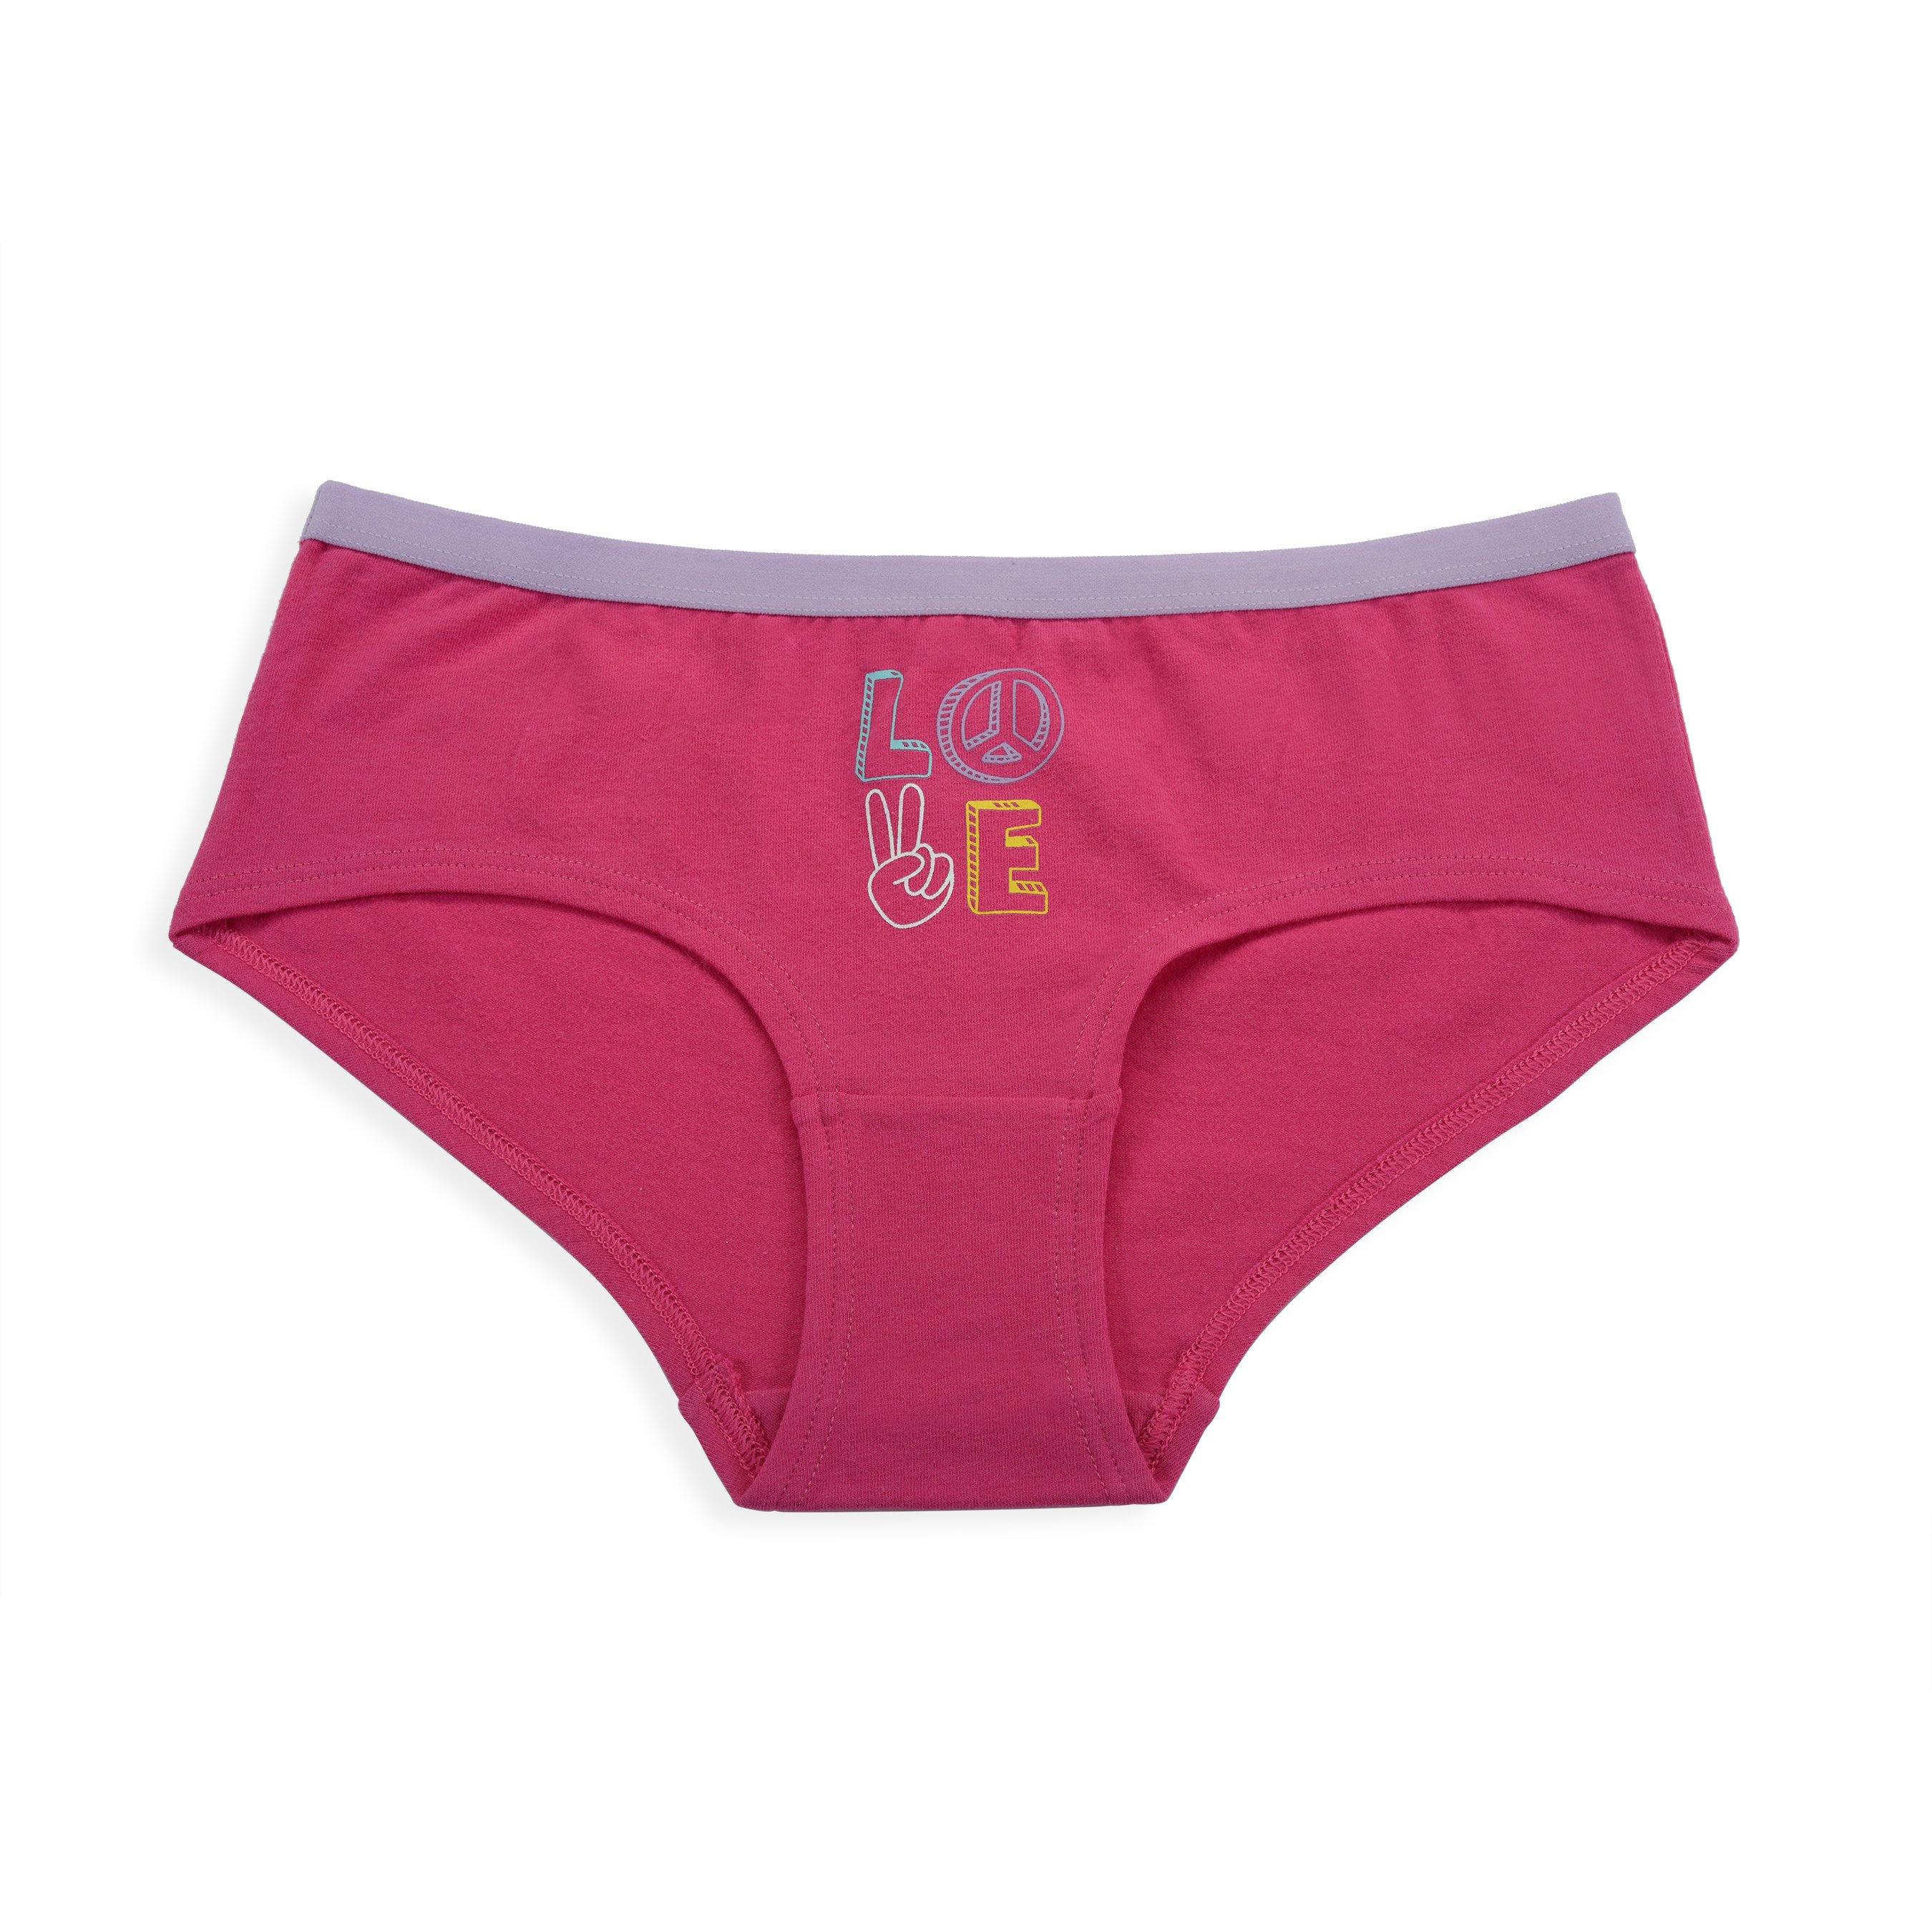 Biofresh Girls' Antimicrobial Cotton Panty 3 pieces in a pack UGPKG4101